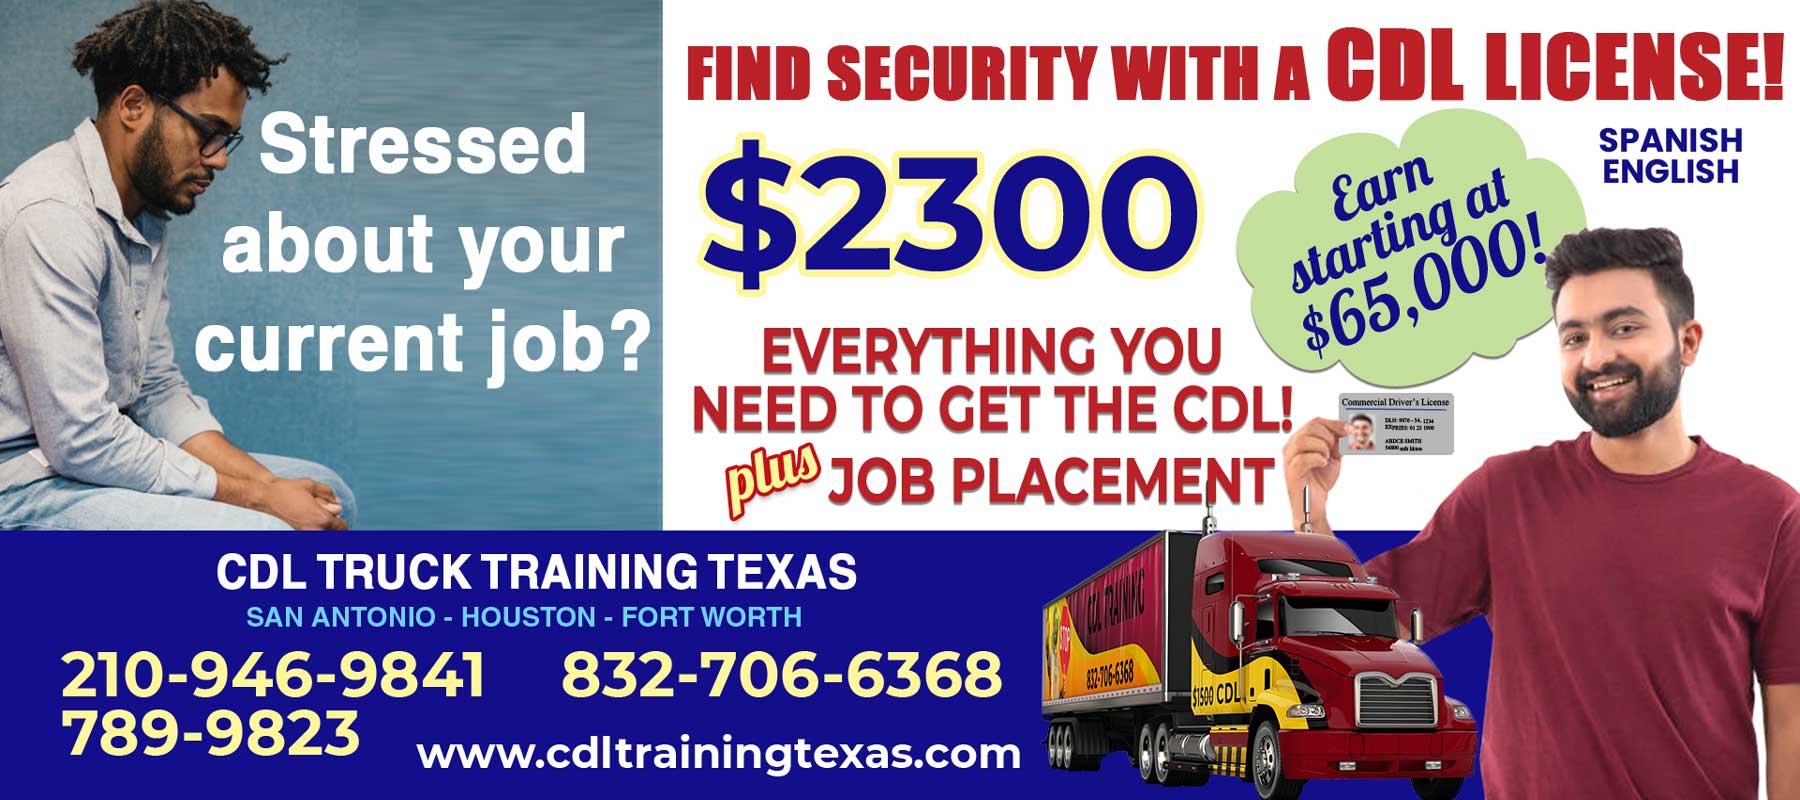 cdl training texas the image show basic information phones